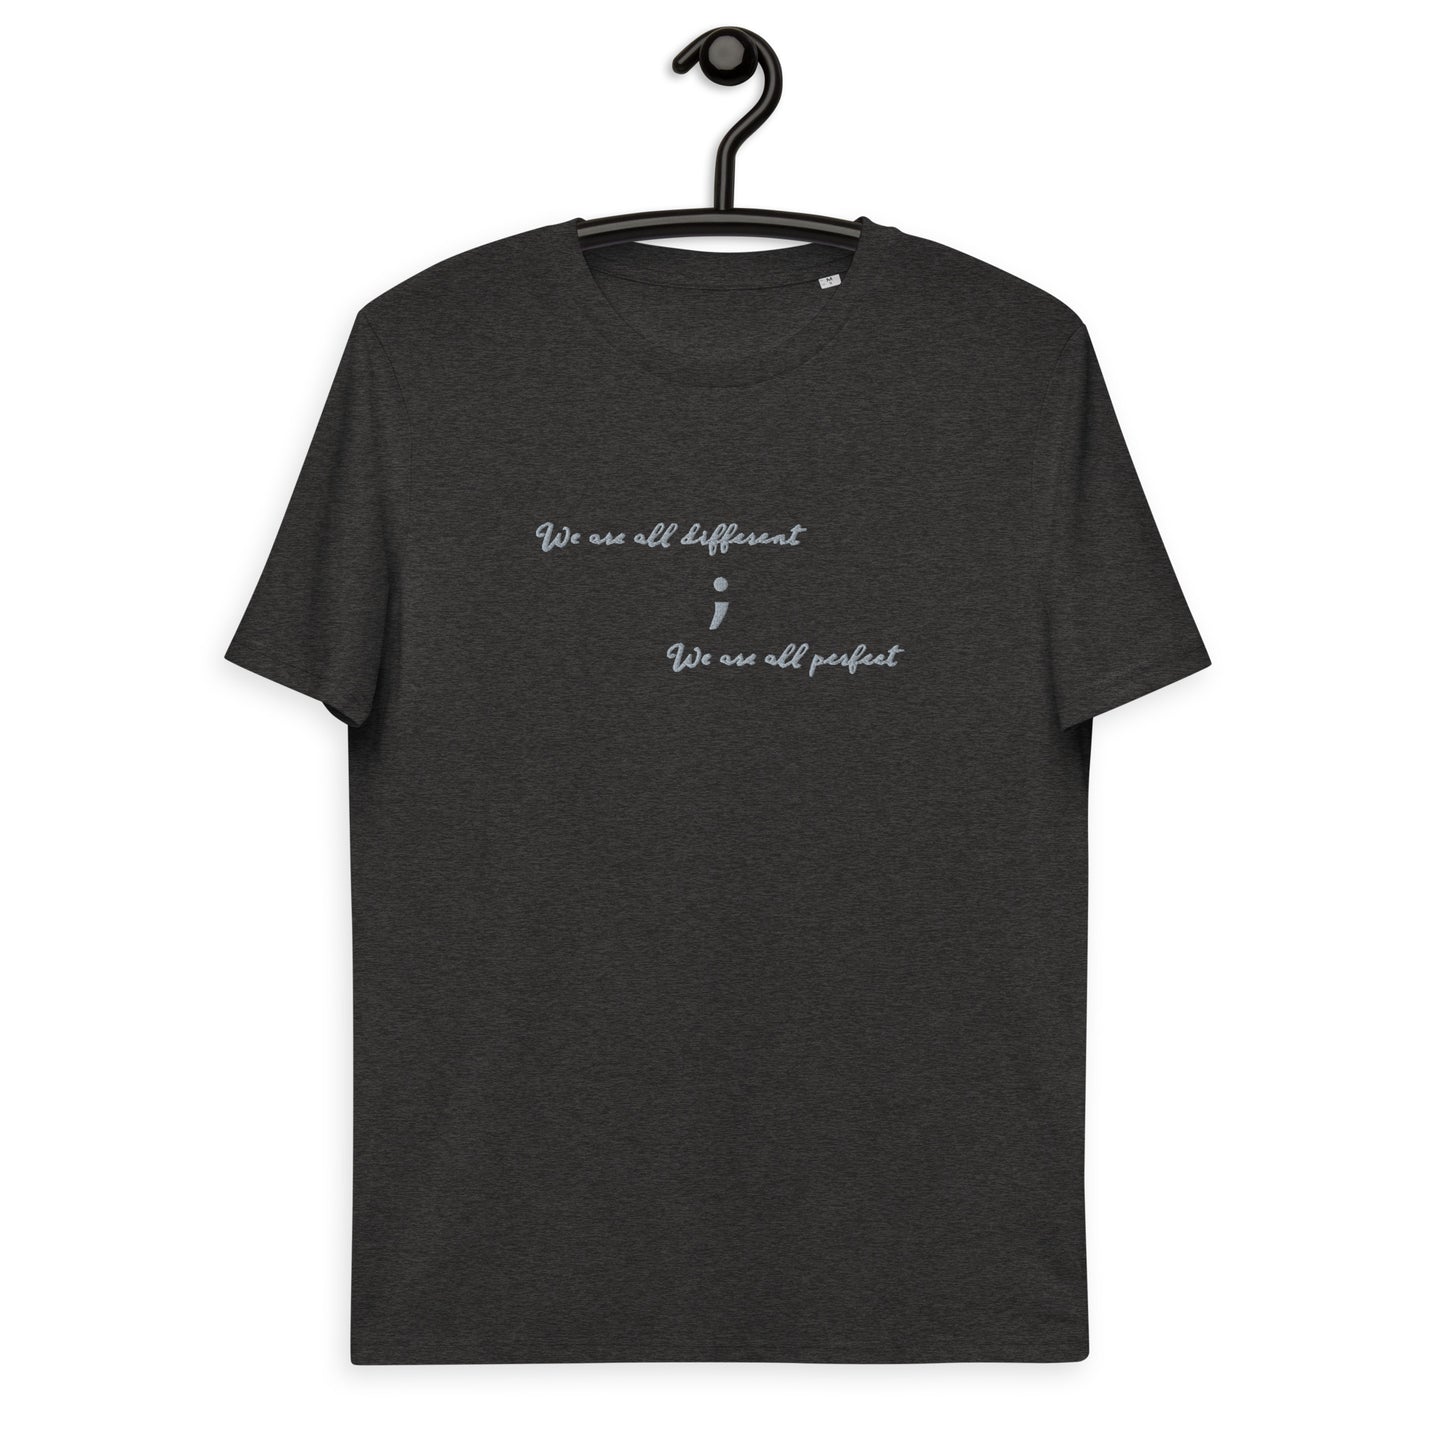 Organic unisex T-Shirt - All different; All perfect